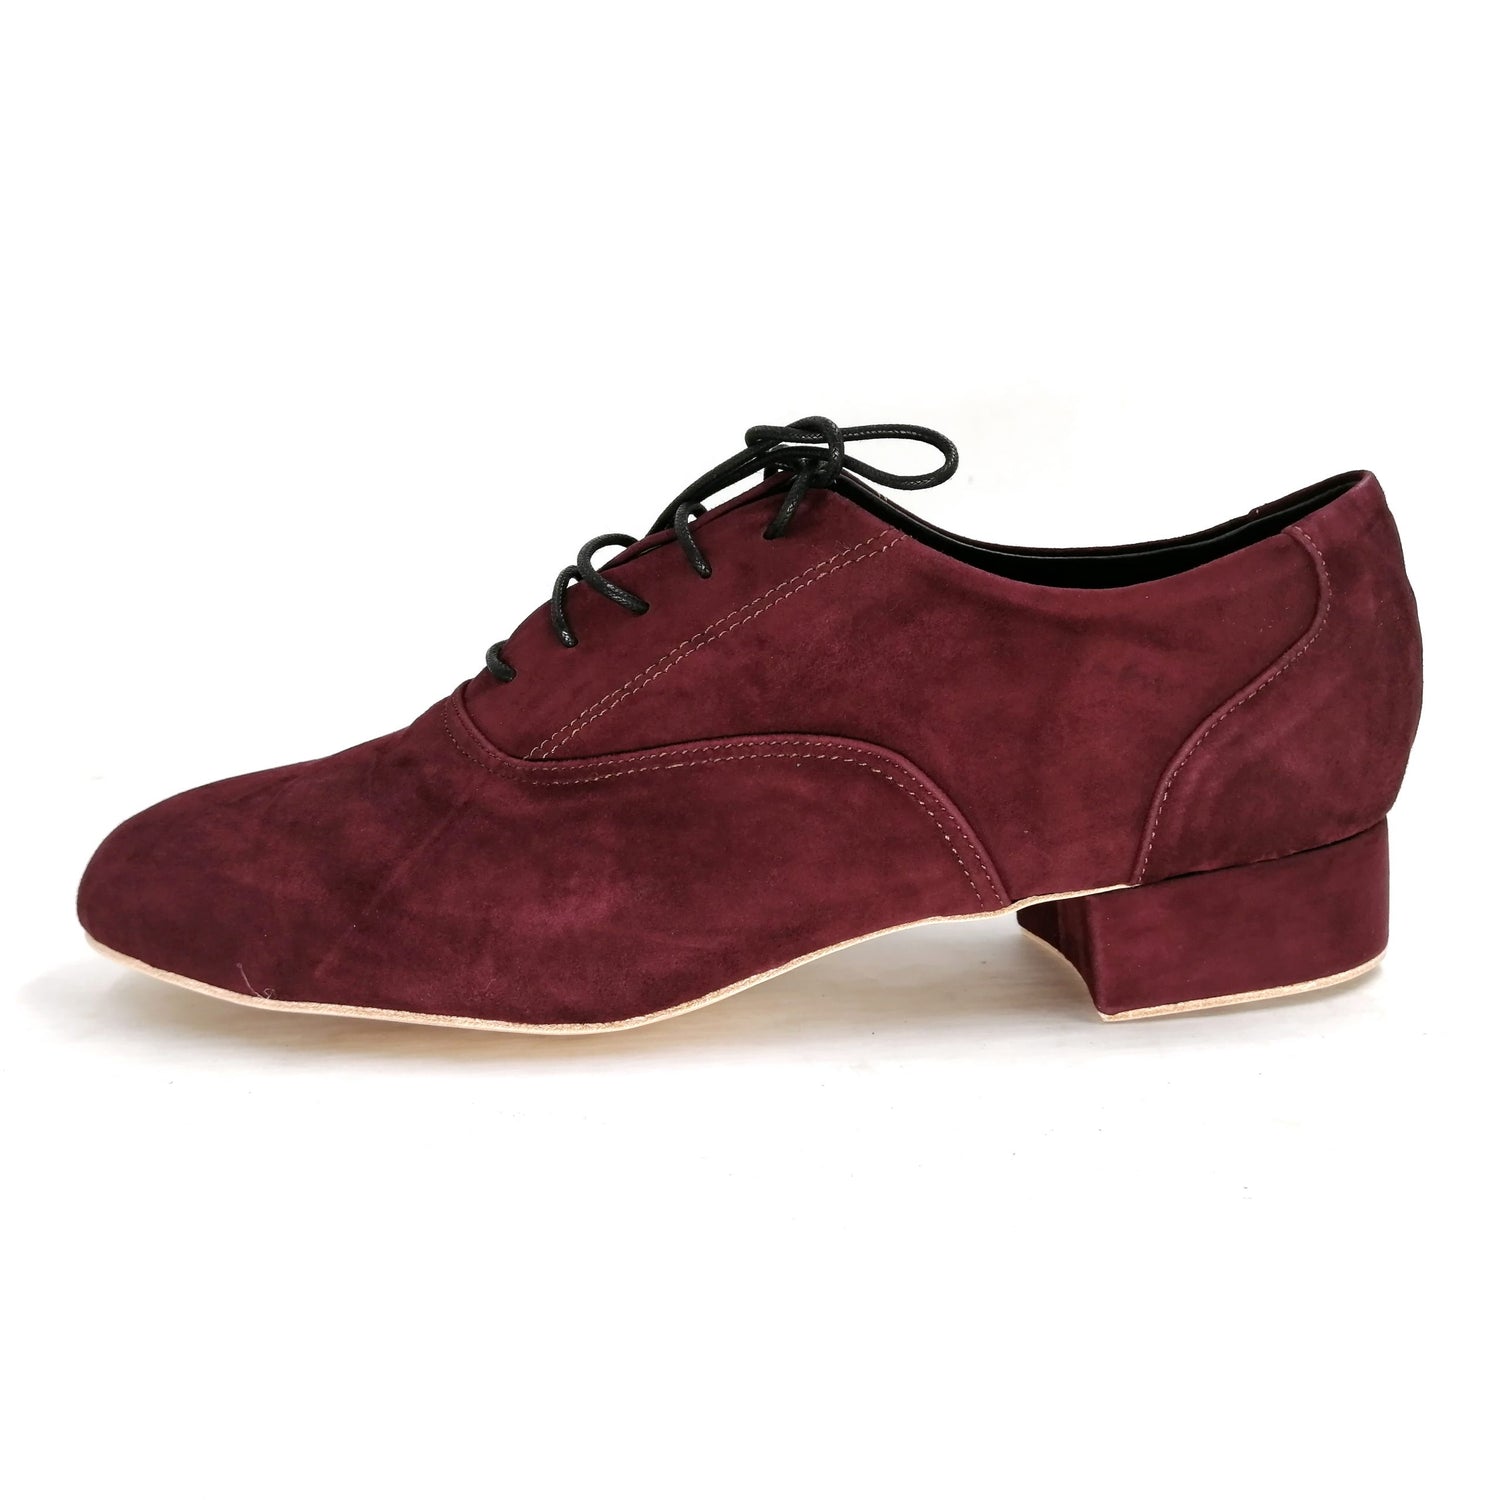 Men's Pro Dancer Argentine Tango Shoes with 1 inch Leather Heel and Lace-up in Brownish Red6